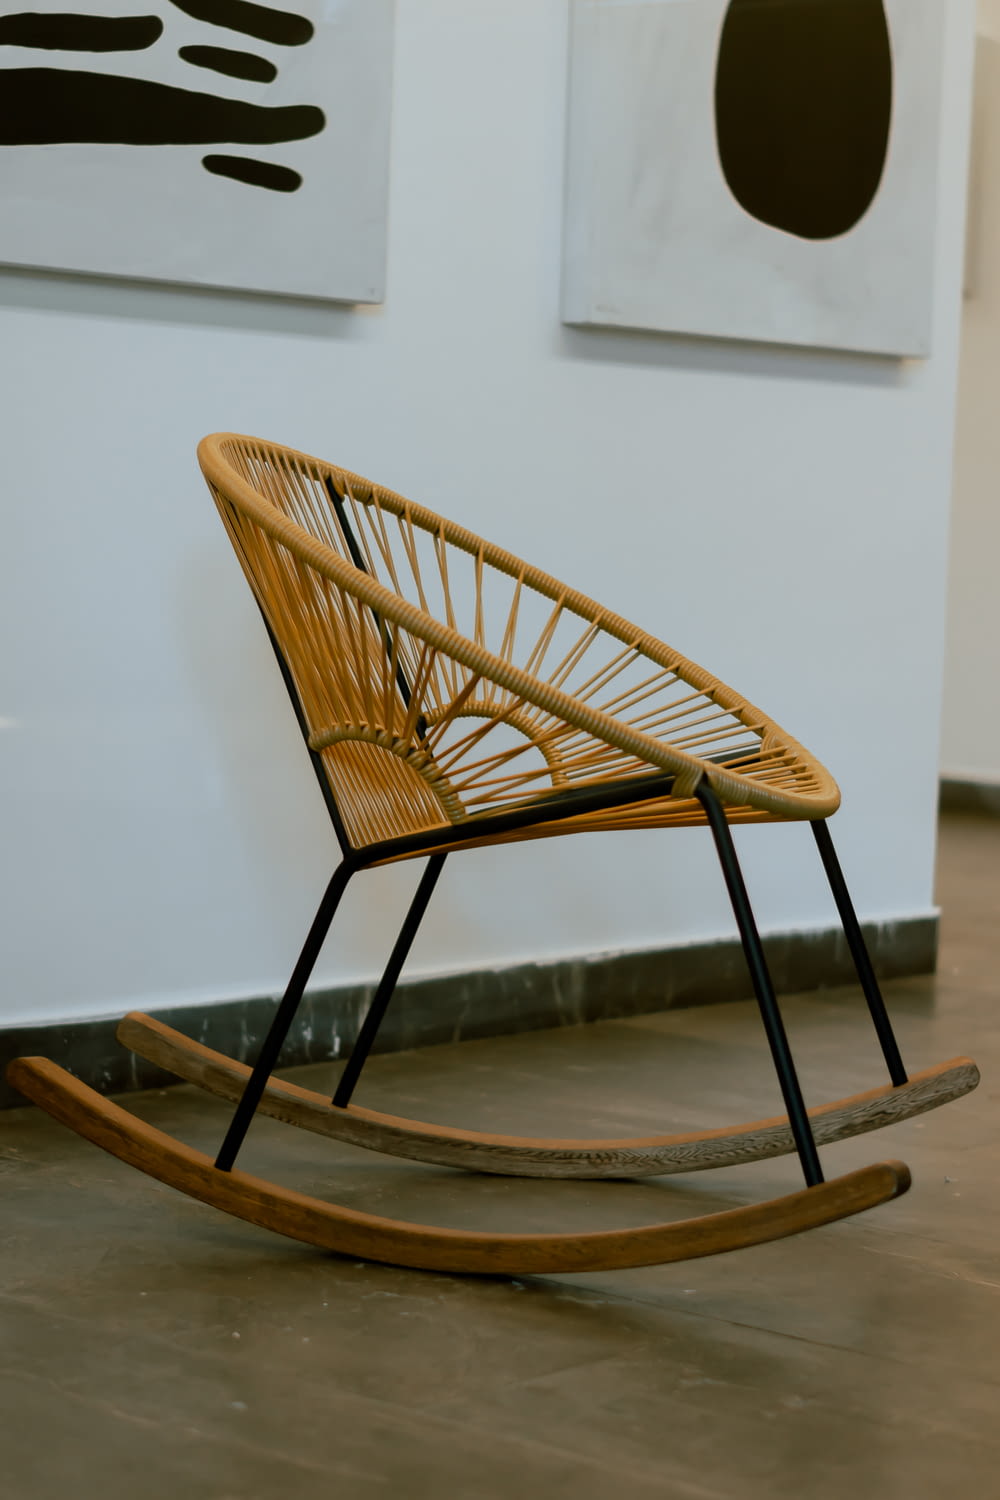 a wicker rocking chair sitting in front of a wall